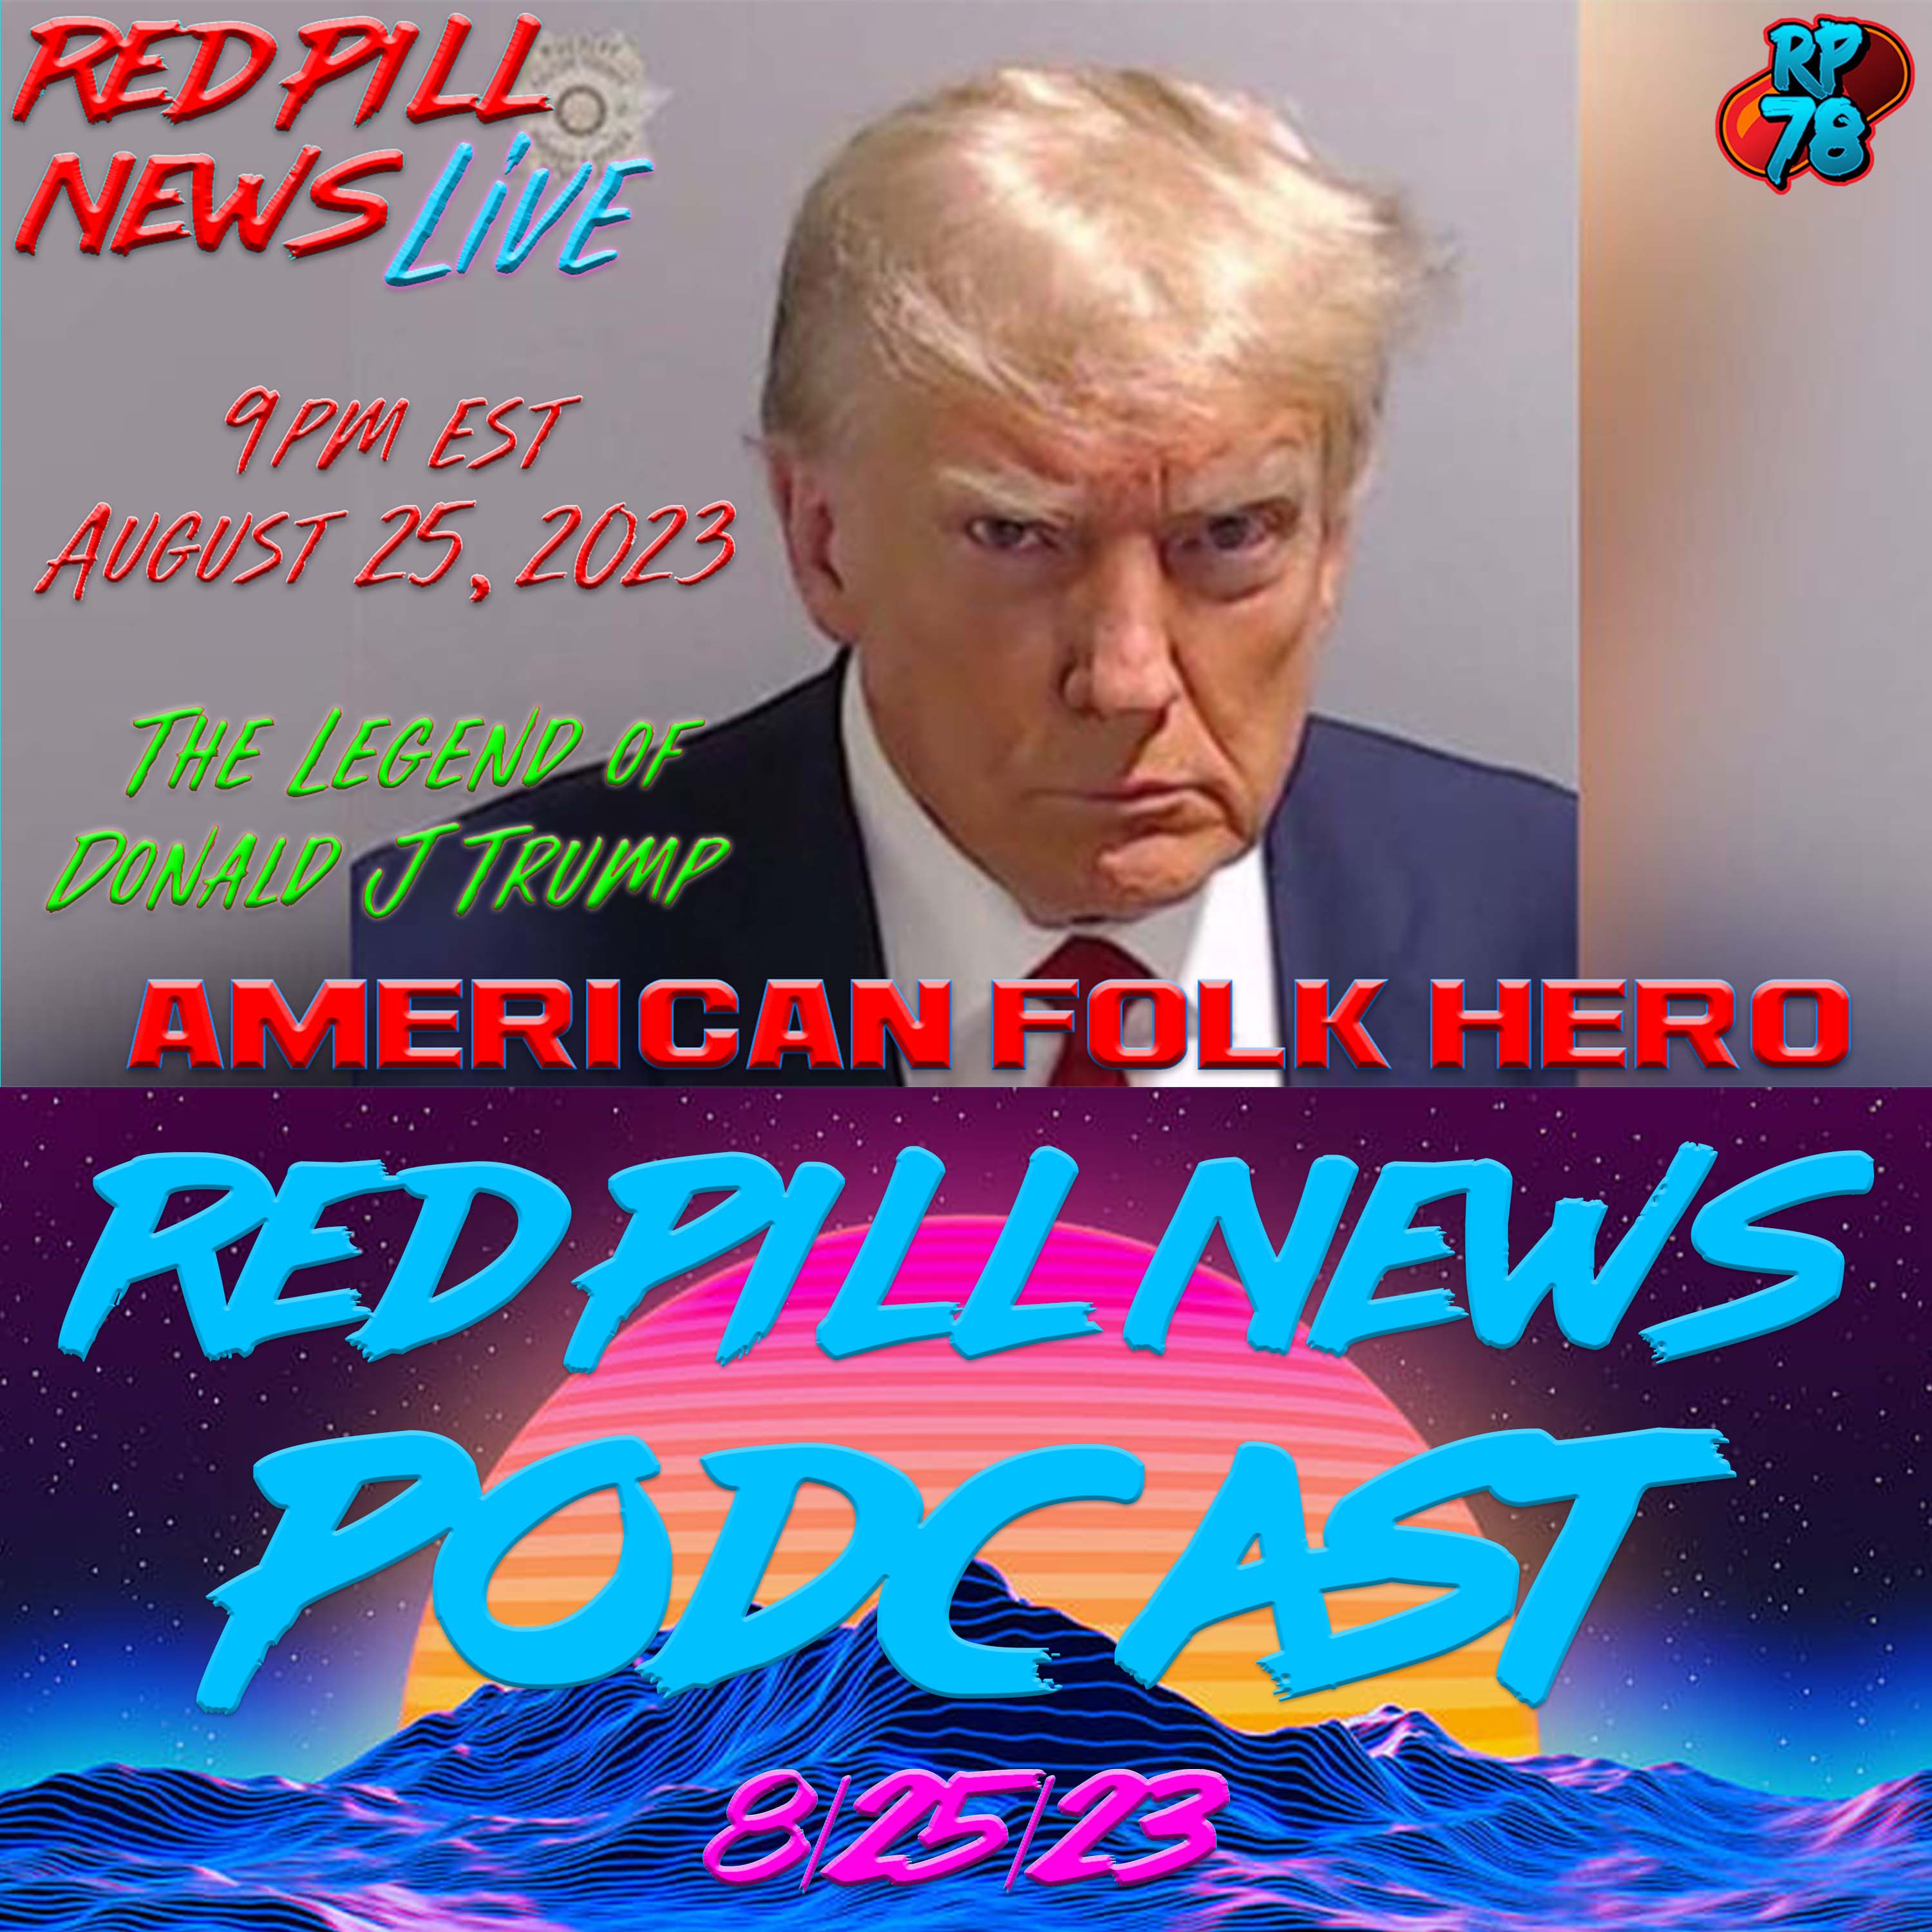 THE MODERN AMERICAN LEGEND OF DONALD J. TRUMP ON RED PILL NEWS LIVE